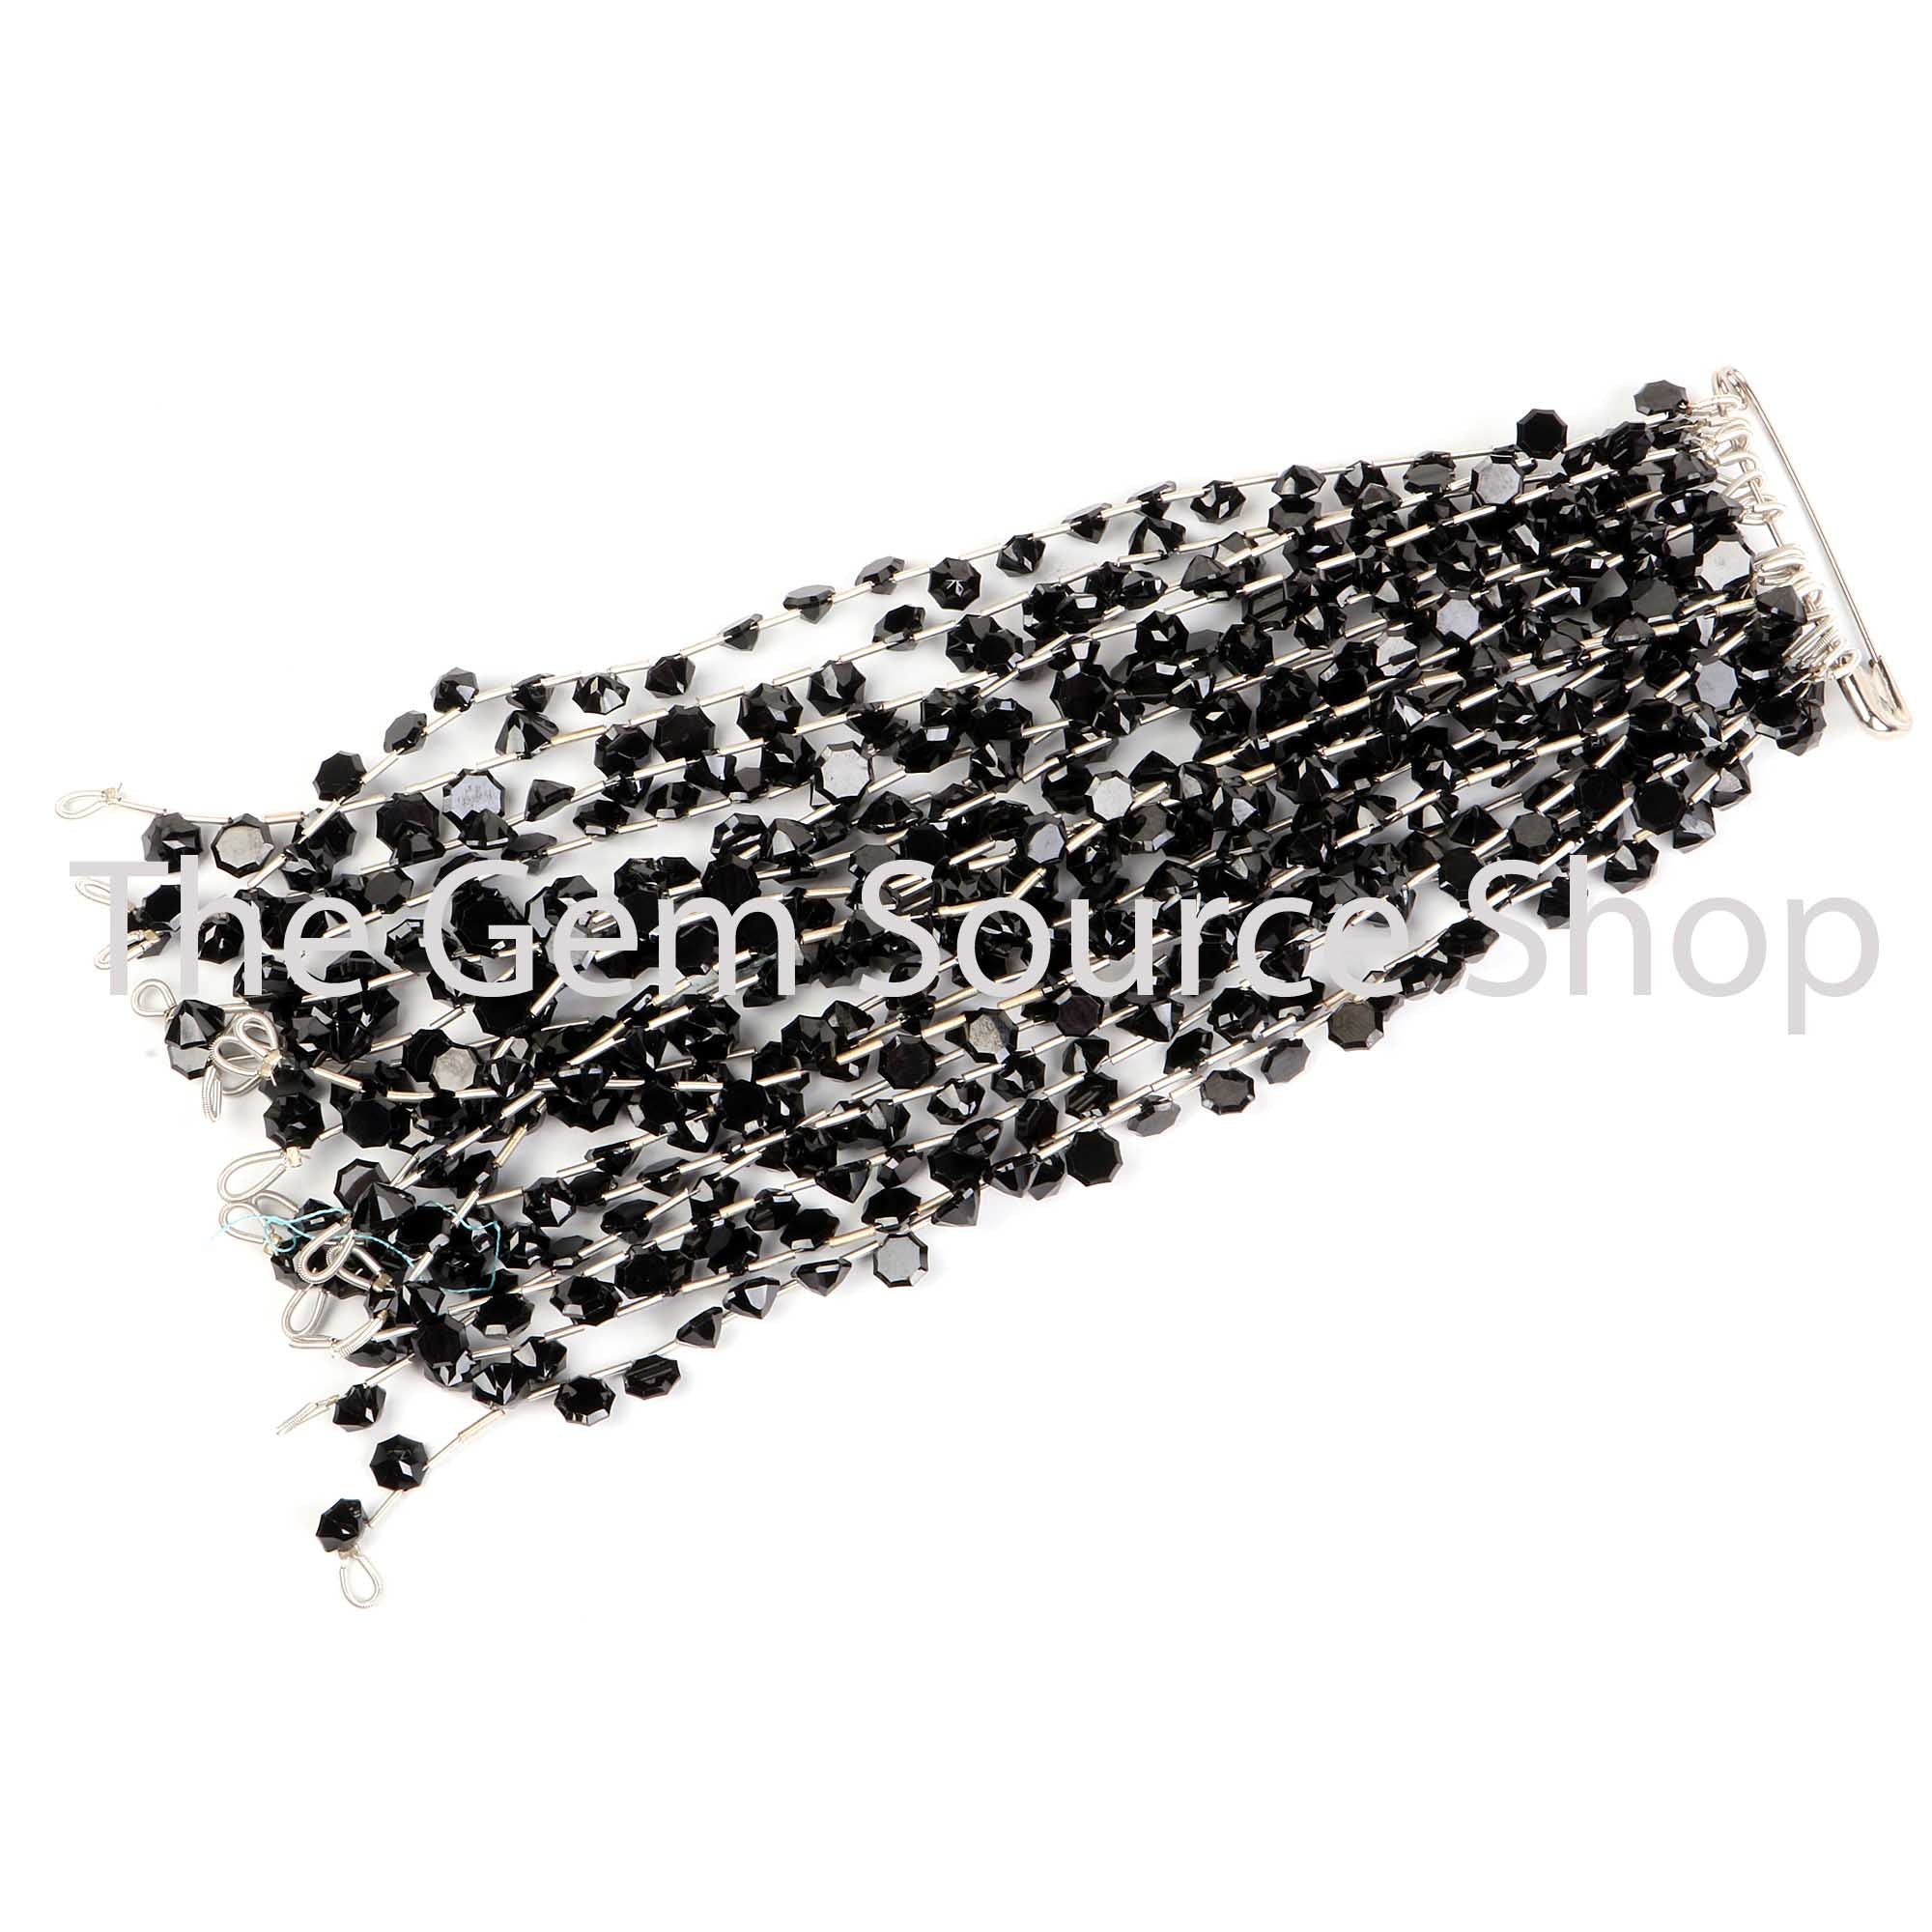 Black Spinel Faceted Beads, Black Spinel Star Cut Round Shape Beads, Wholesale Gemstone Beads